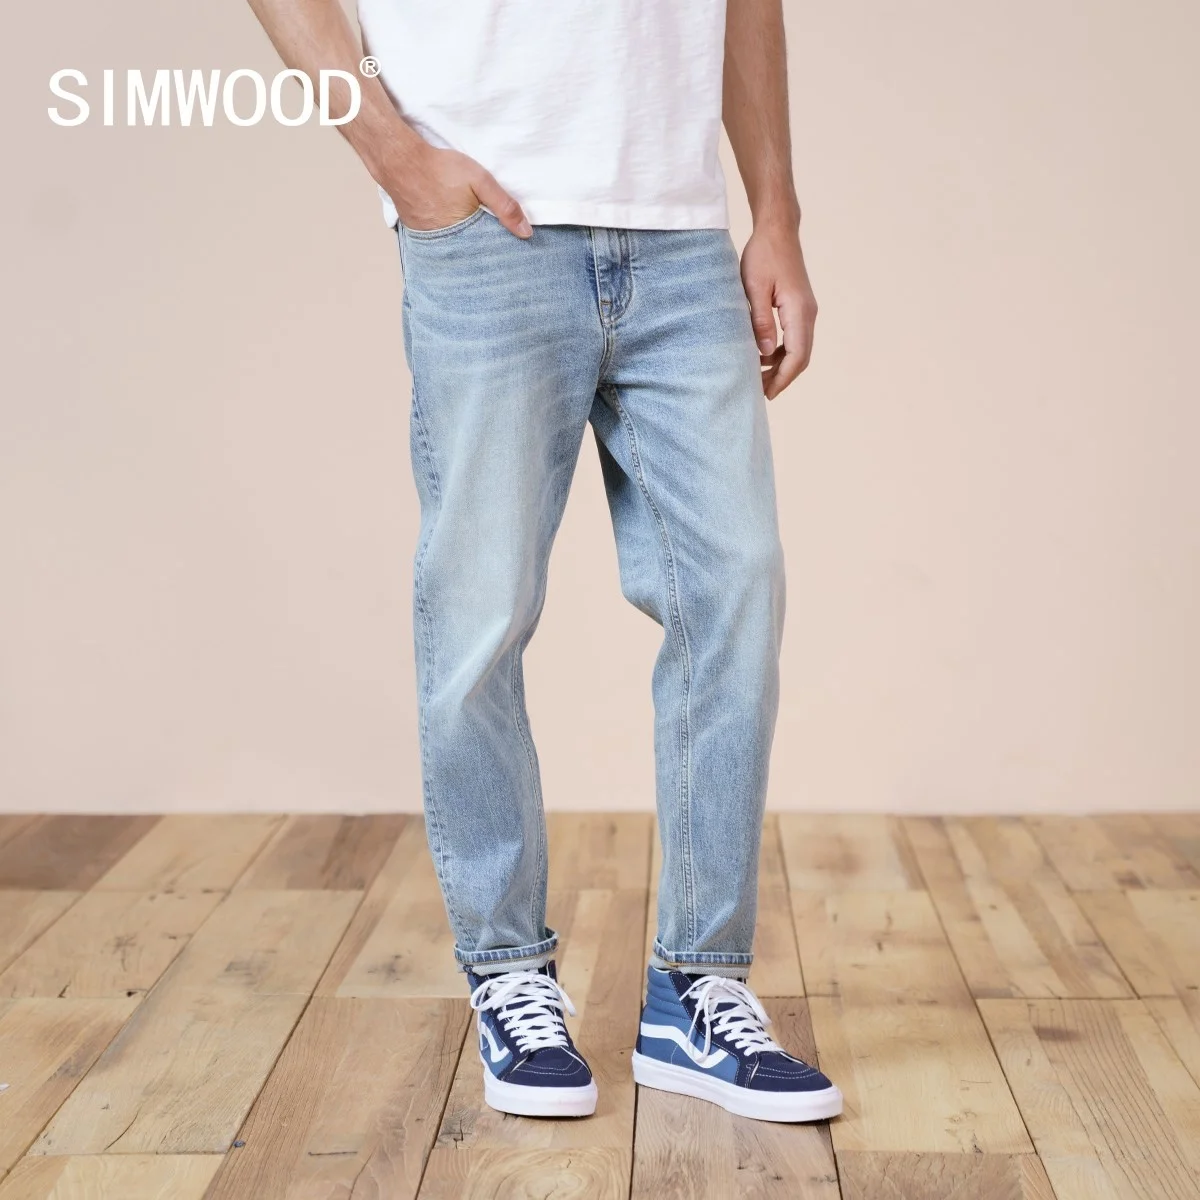 

SIWMOOD 2023 S Spring New Environmental laser washed jeans men slim fit classical denim trousers high quality jean SJ170768